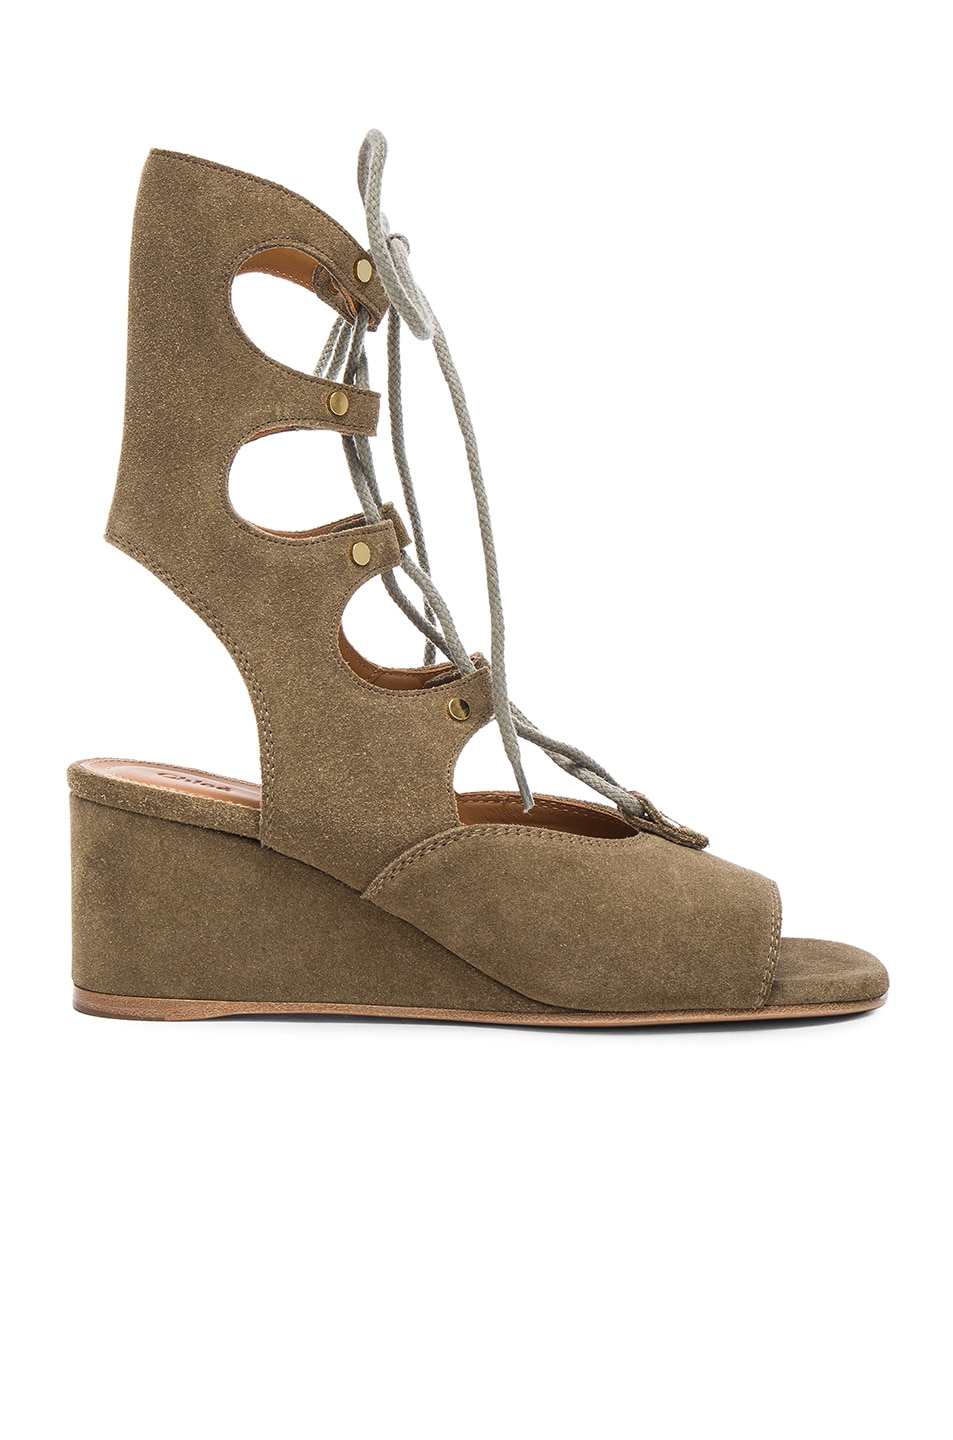 Image 1 of Chloe Foster Suede Wedge Sandals in Military Green